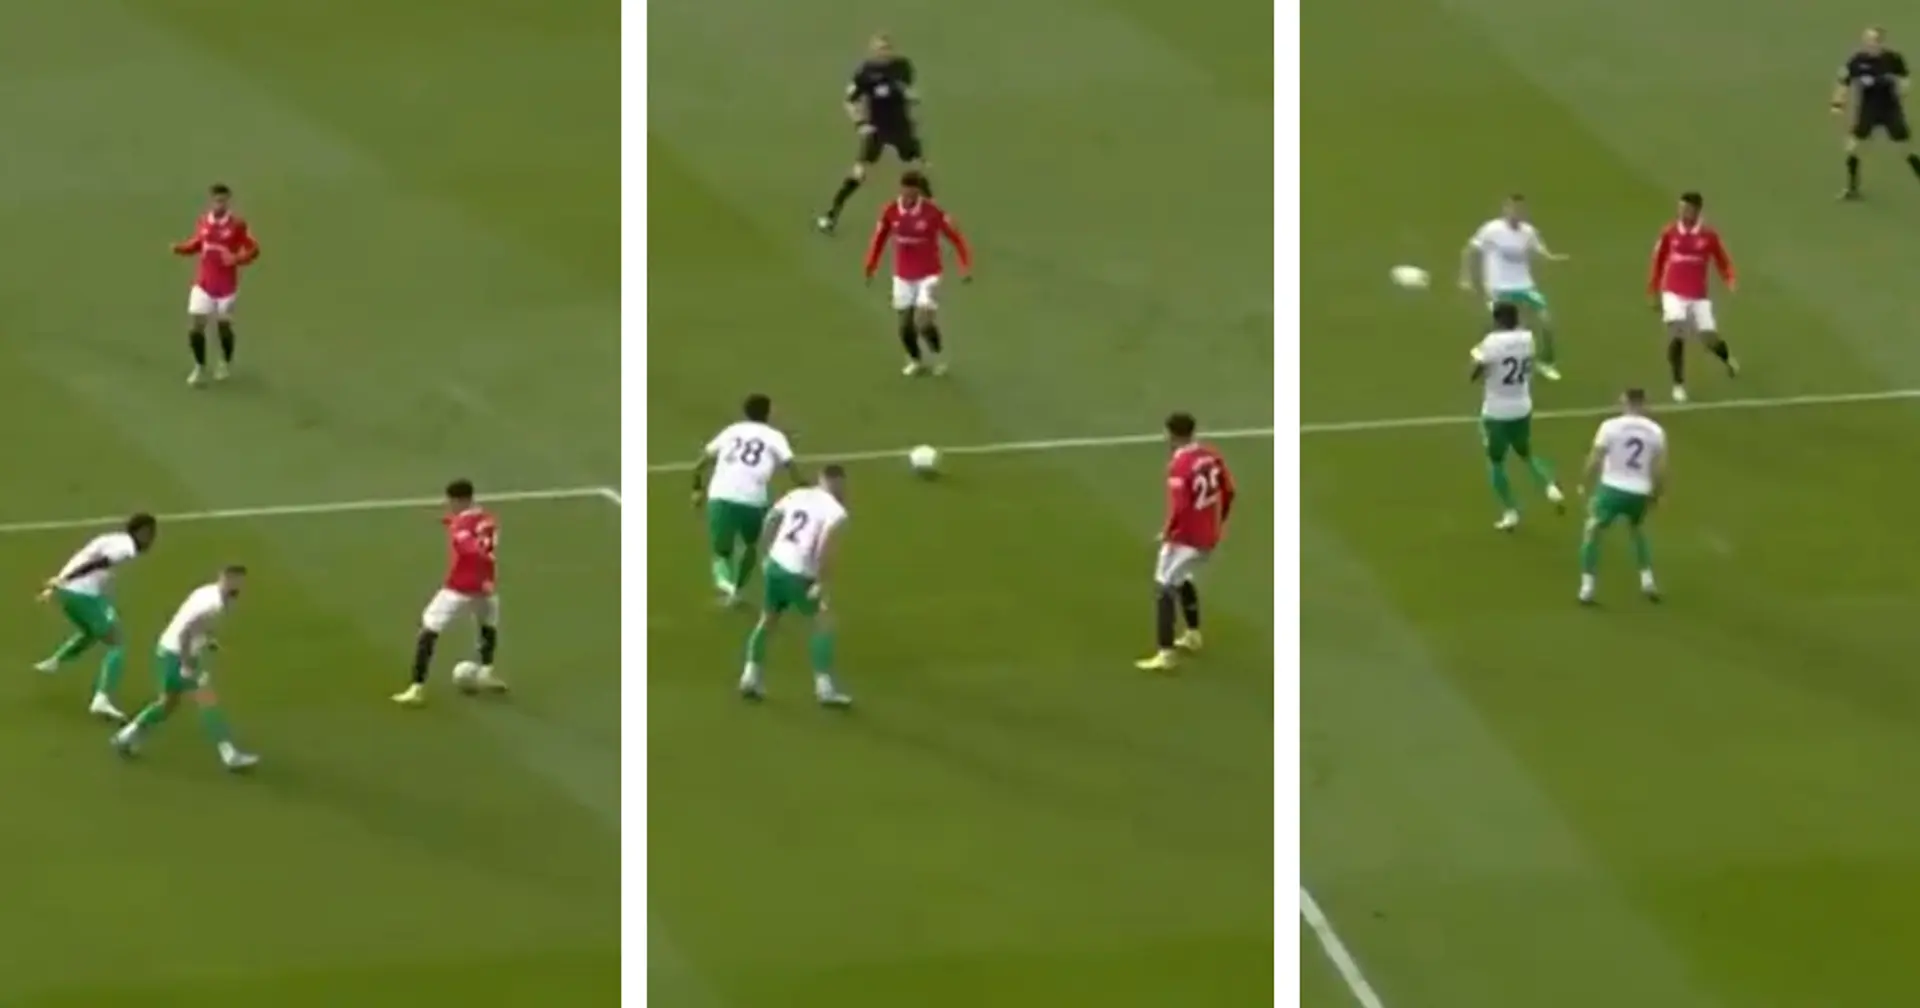 'Why is everyone talking about the miss and not the Casemiro pass?': fans see silver lining in Rashford's miss